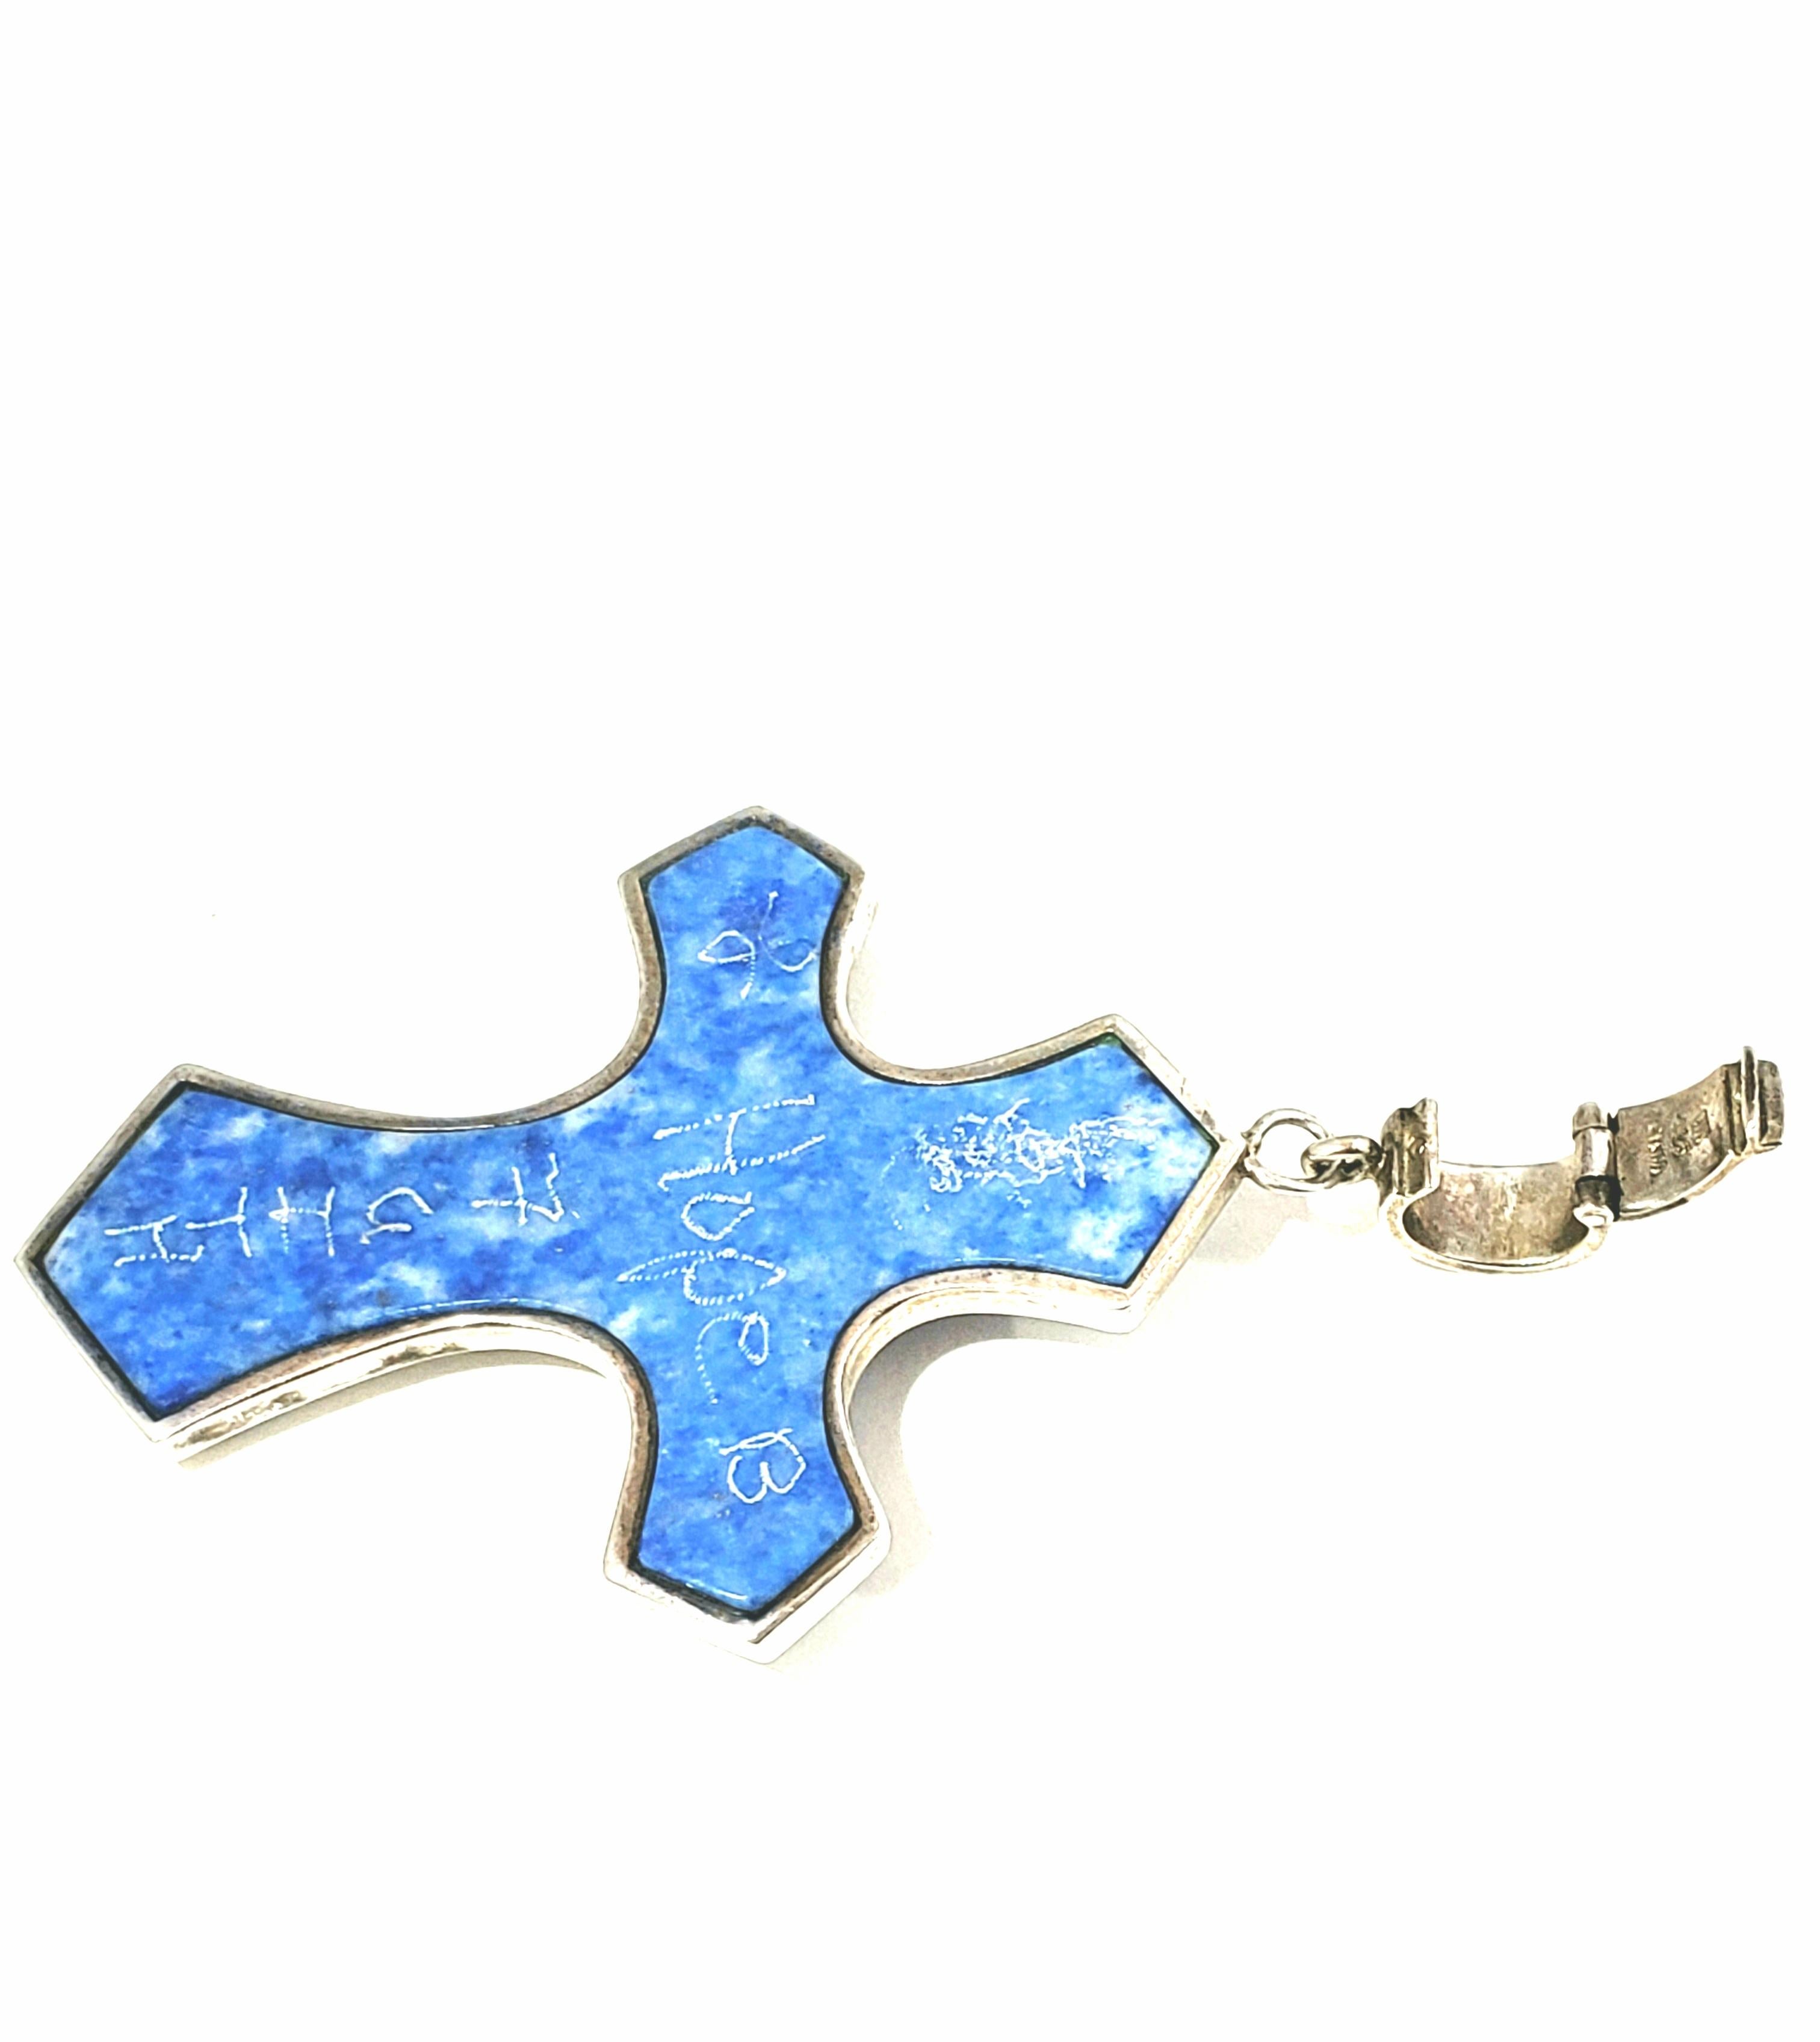 Whitney Kelly WK Sterling Blue Denim Lapis Cross Pendant

This is a large denim lapis stone cross pendant by Whitney Kelly WK.  It is double sided and framed in sterling silver & decorated with beads on one side. The bail has a hinged enhancer that